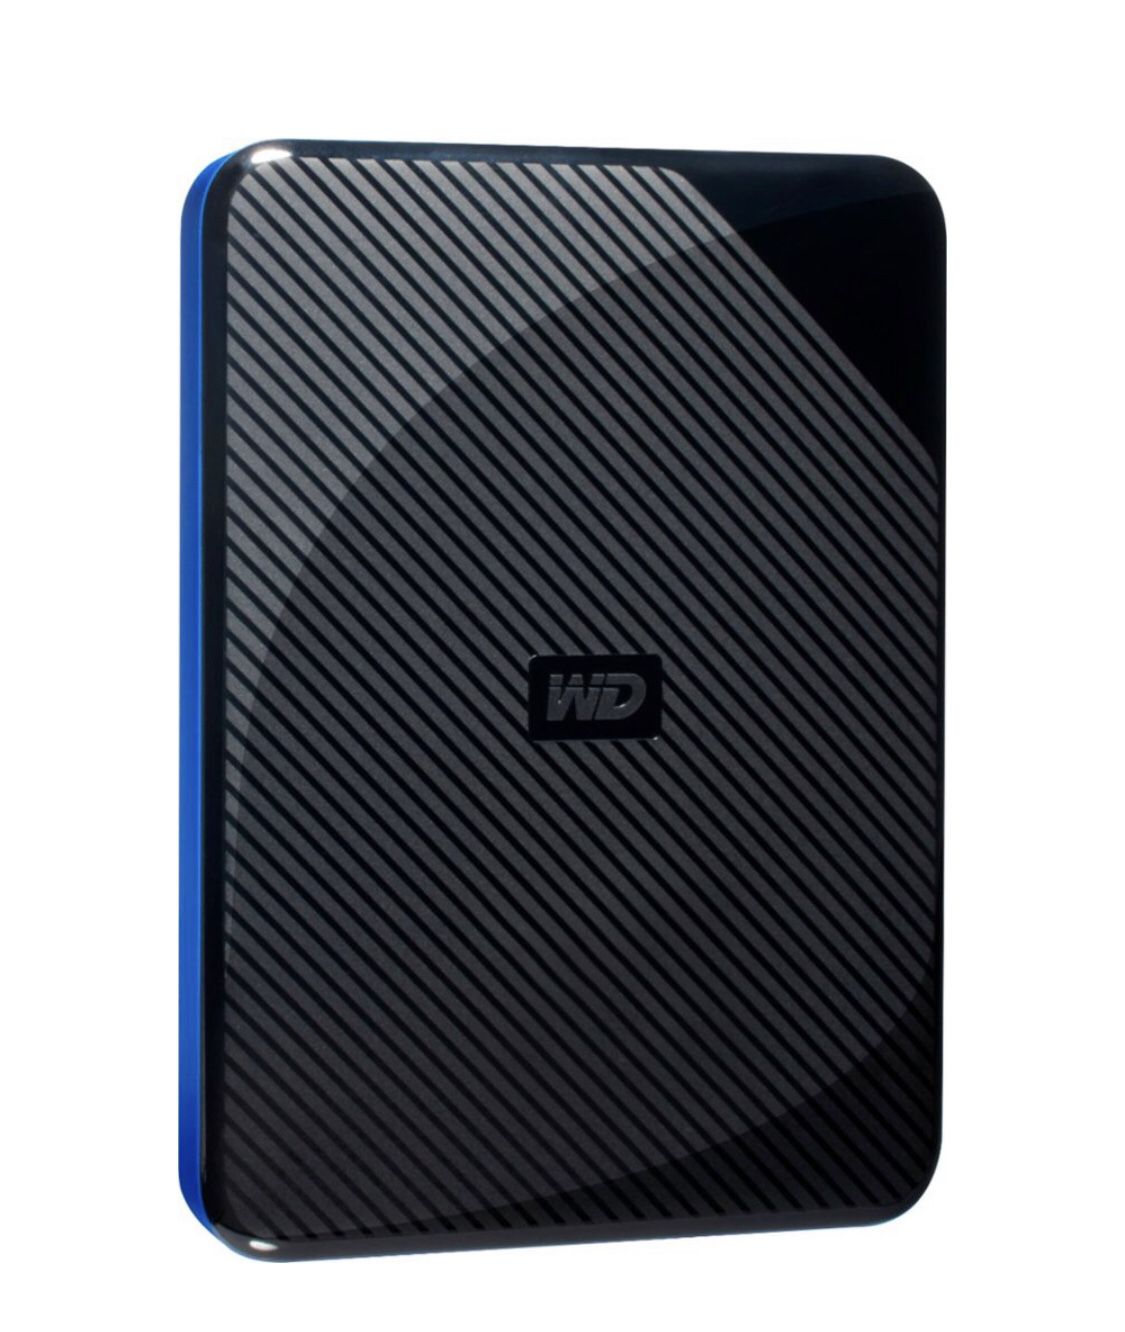 2TB External Game Drive for PS4